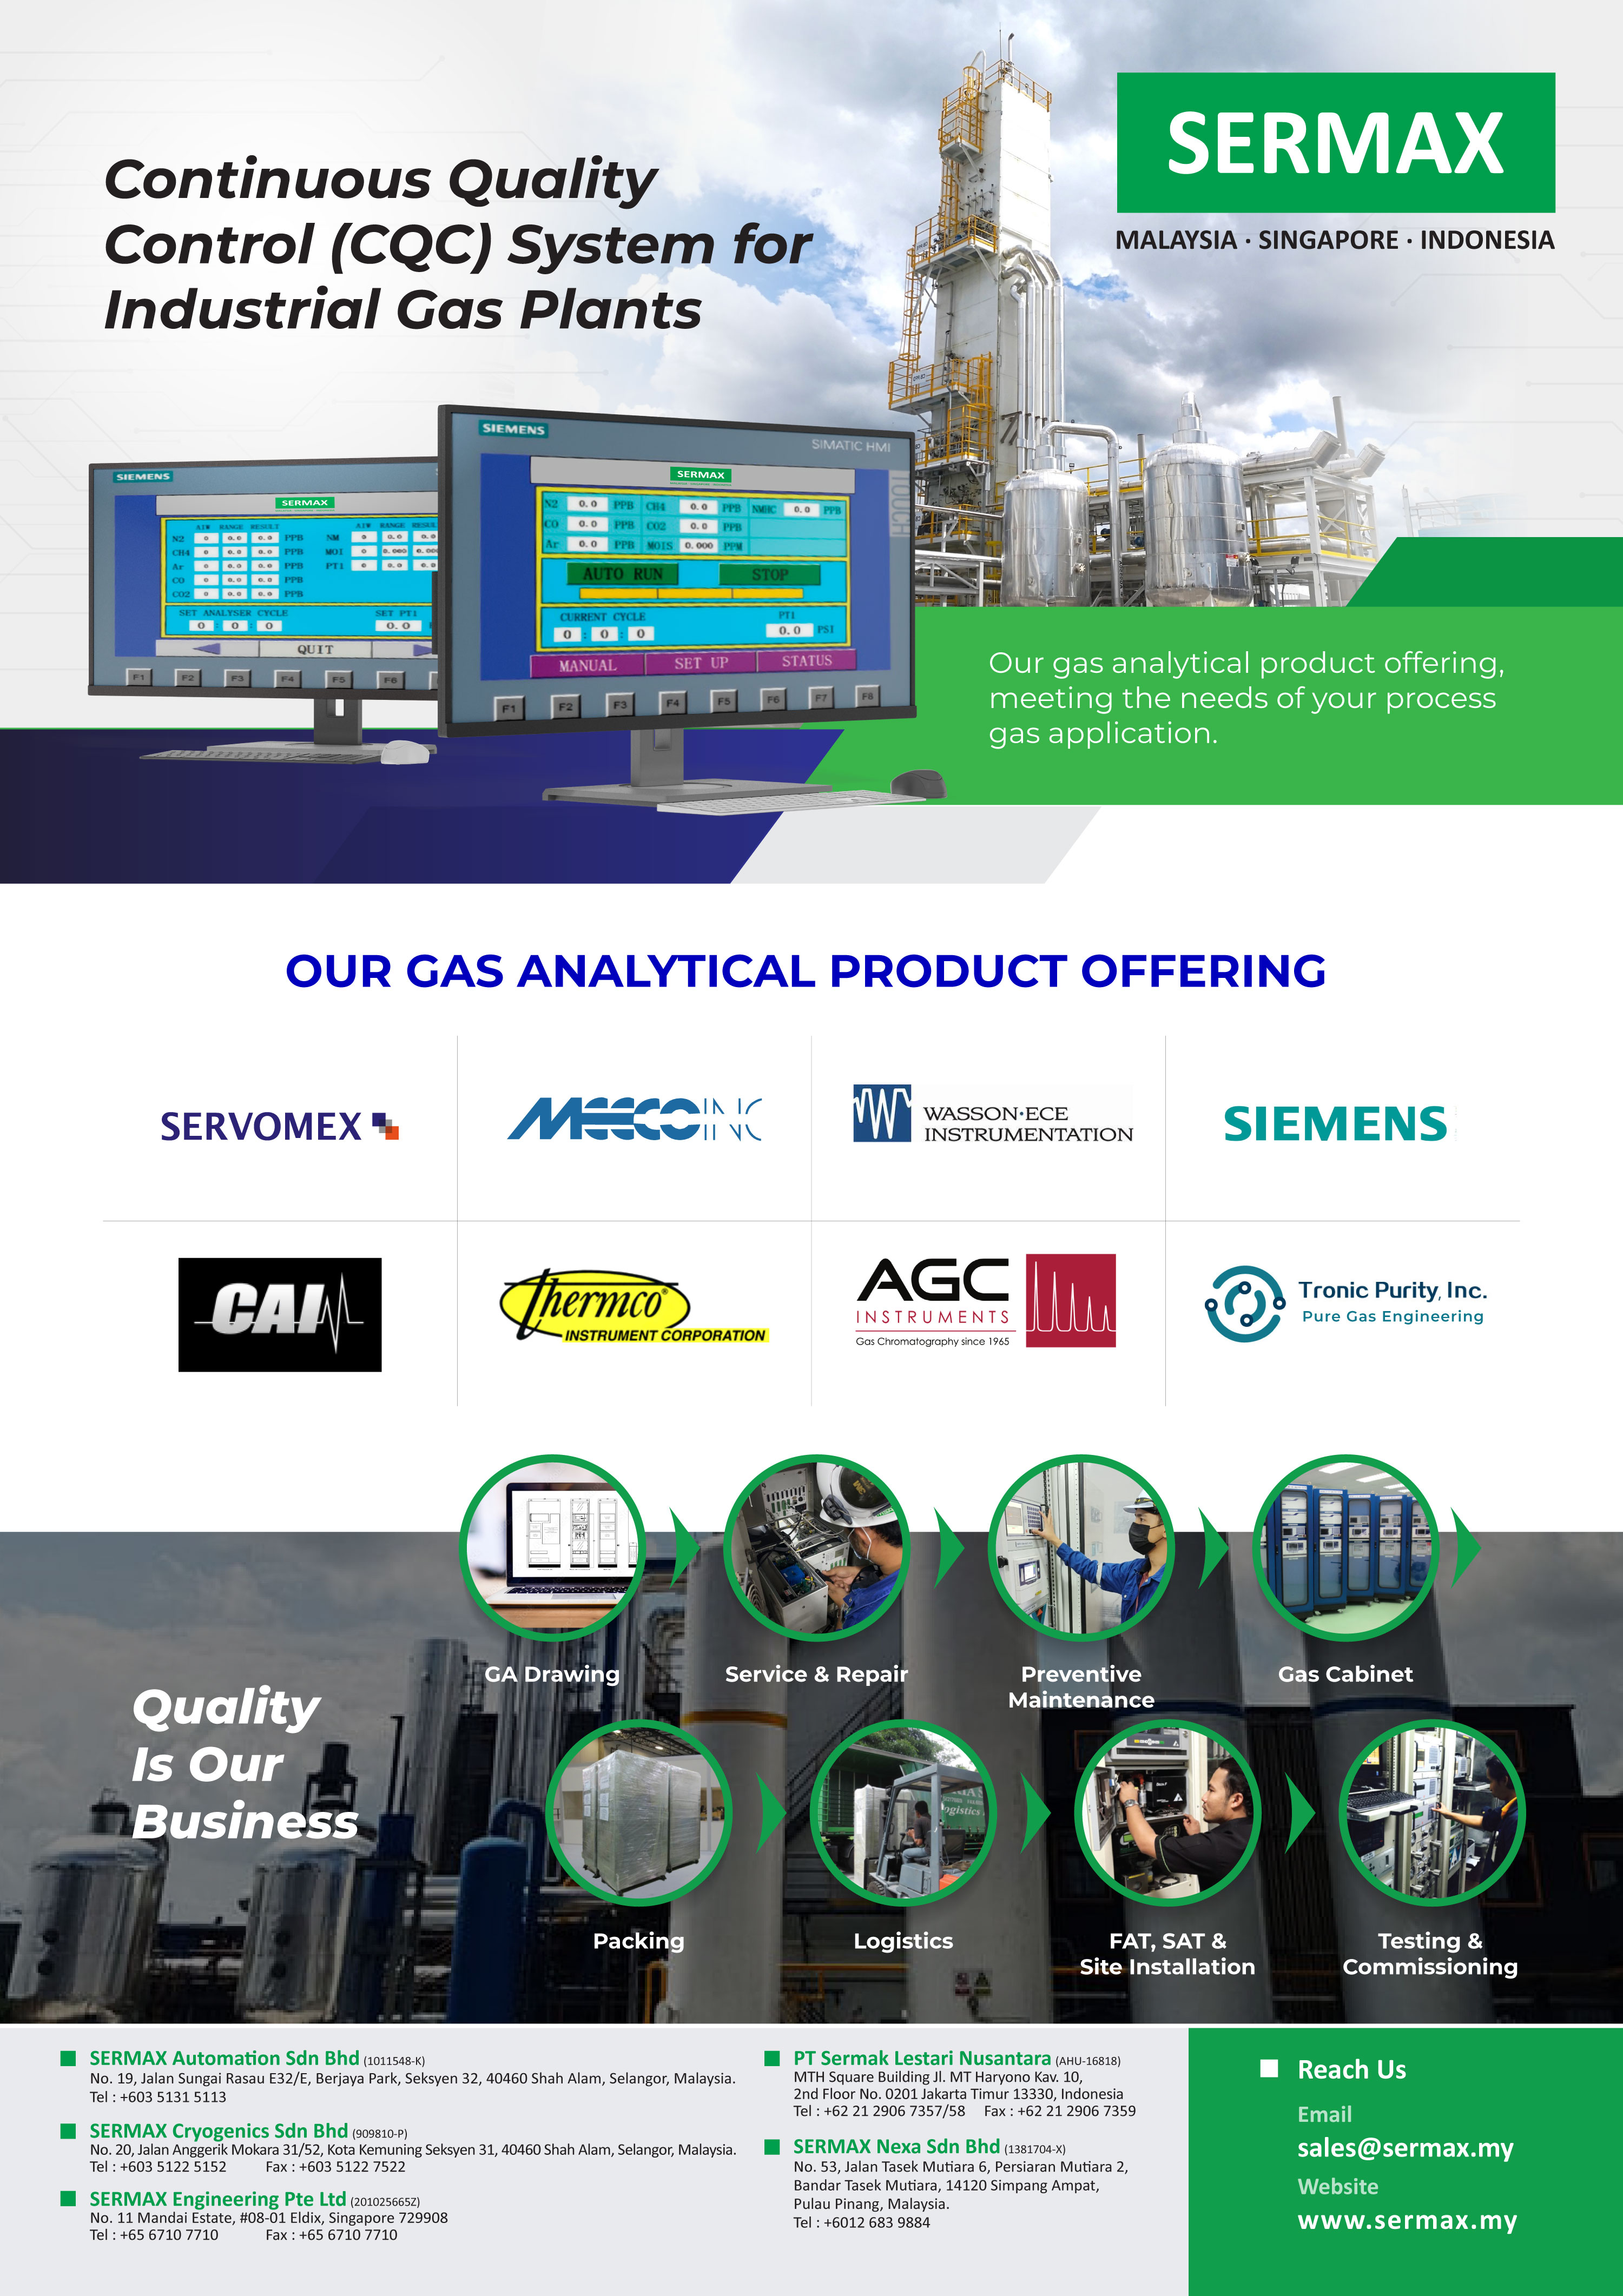 Continuous Quality Control (CQC) System for Industrial Gas Plants